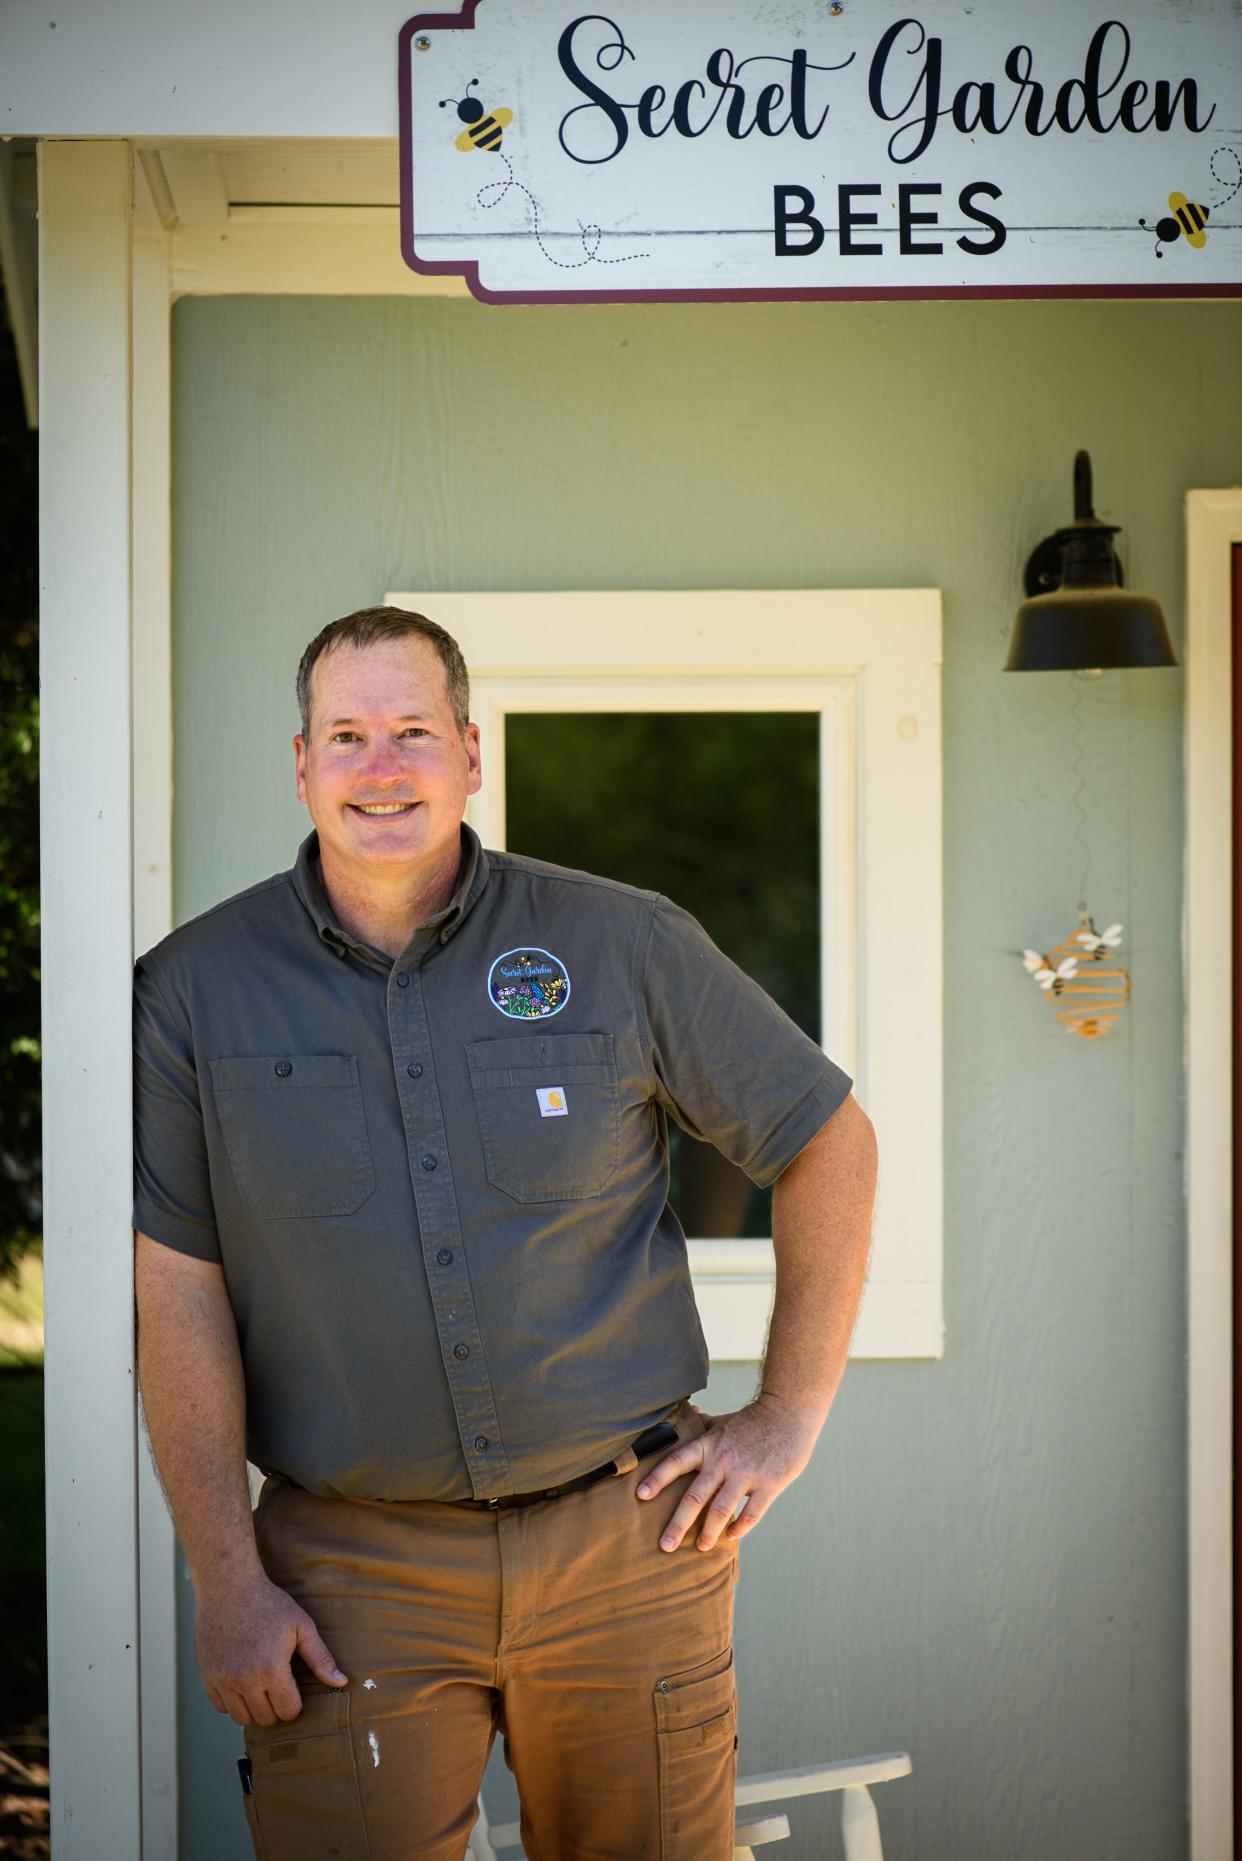 Jim Hartman, a Cumberland County veteran won the NC small farmer of the year award, a few years after starting his business, Secret Garden Bees, to help cope with PTSD from two tours in Iraq.